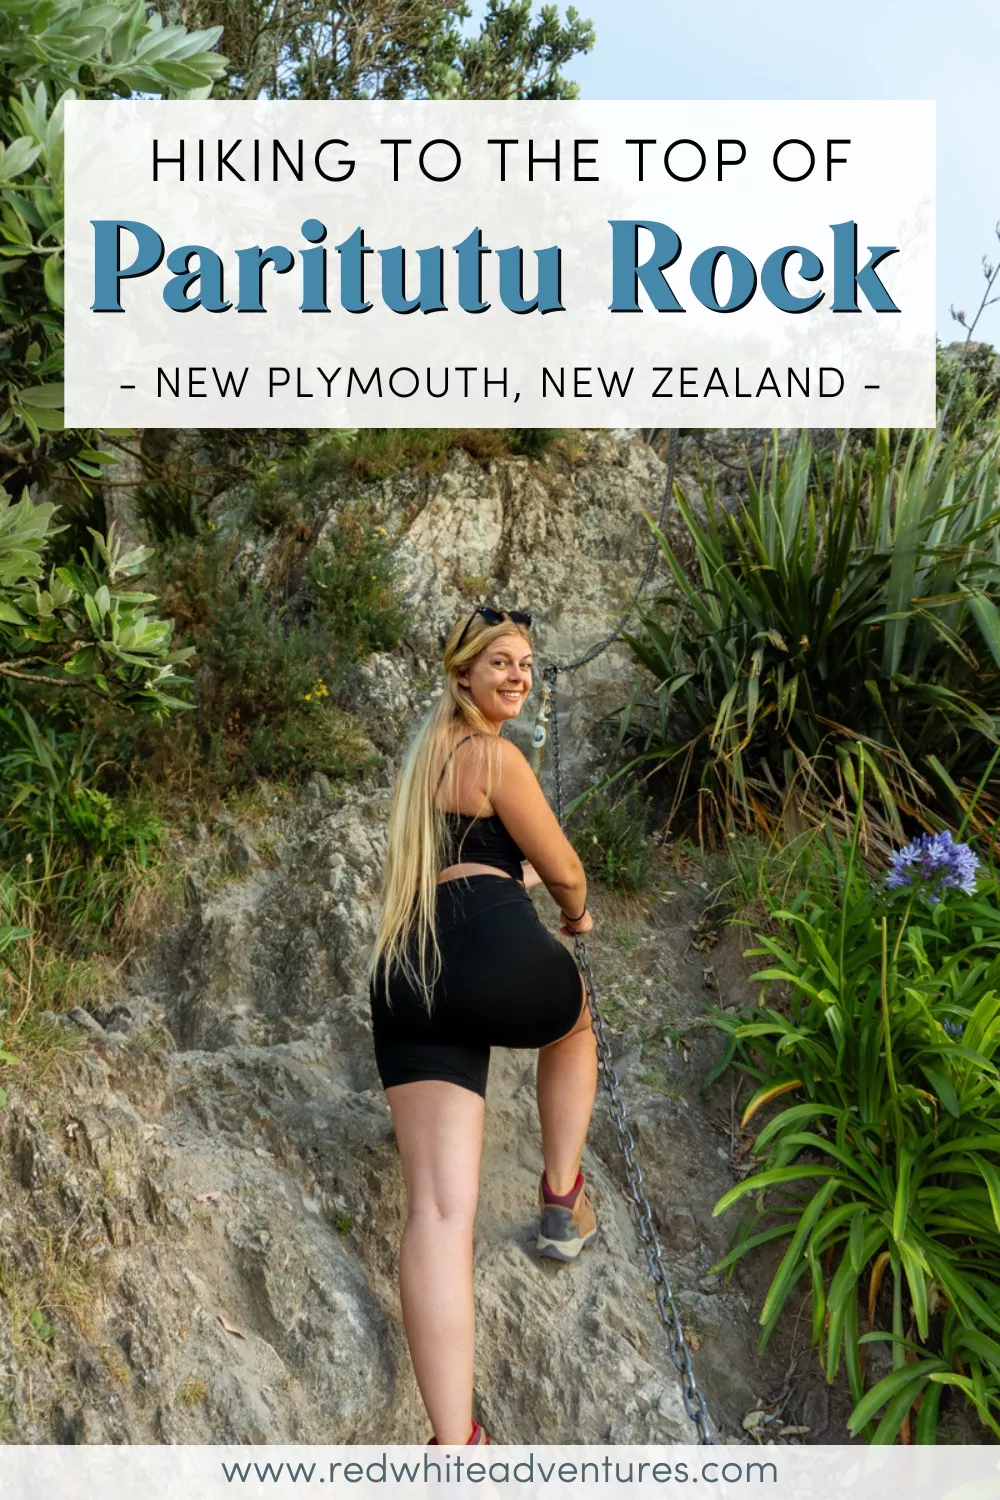 Pin for Pinterest of hiking the famous Paritutu Rock in New Zealand.